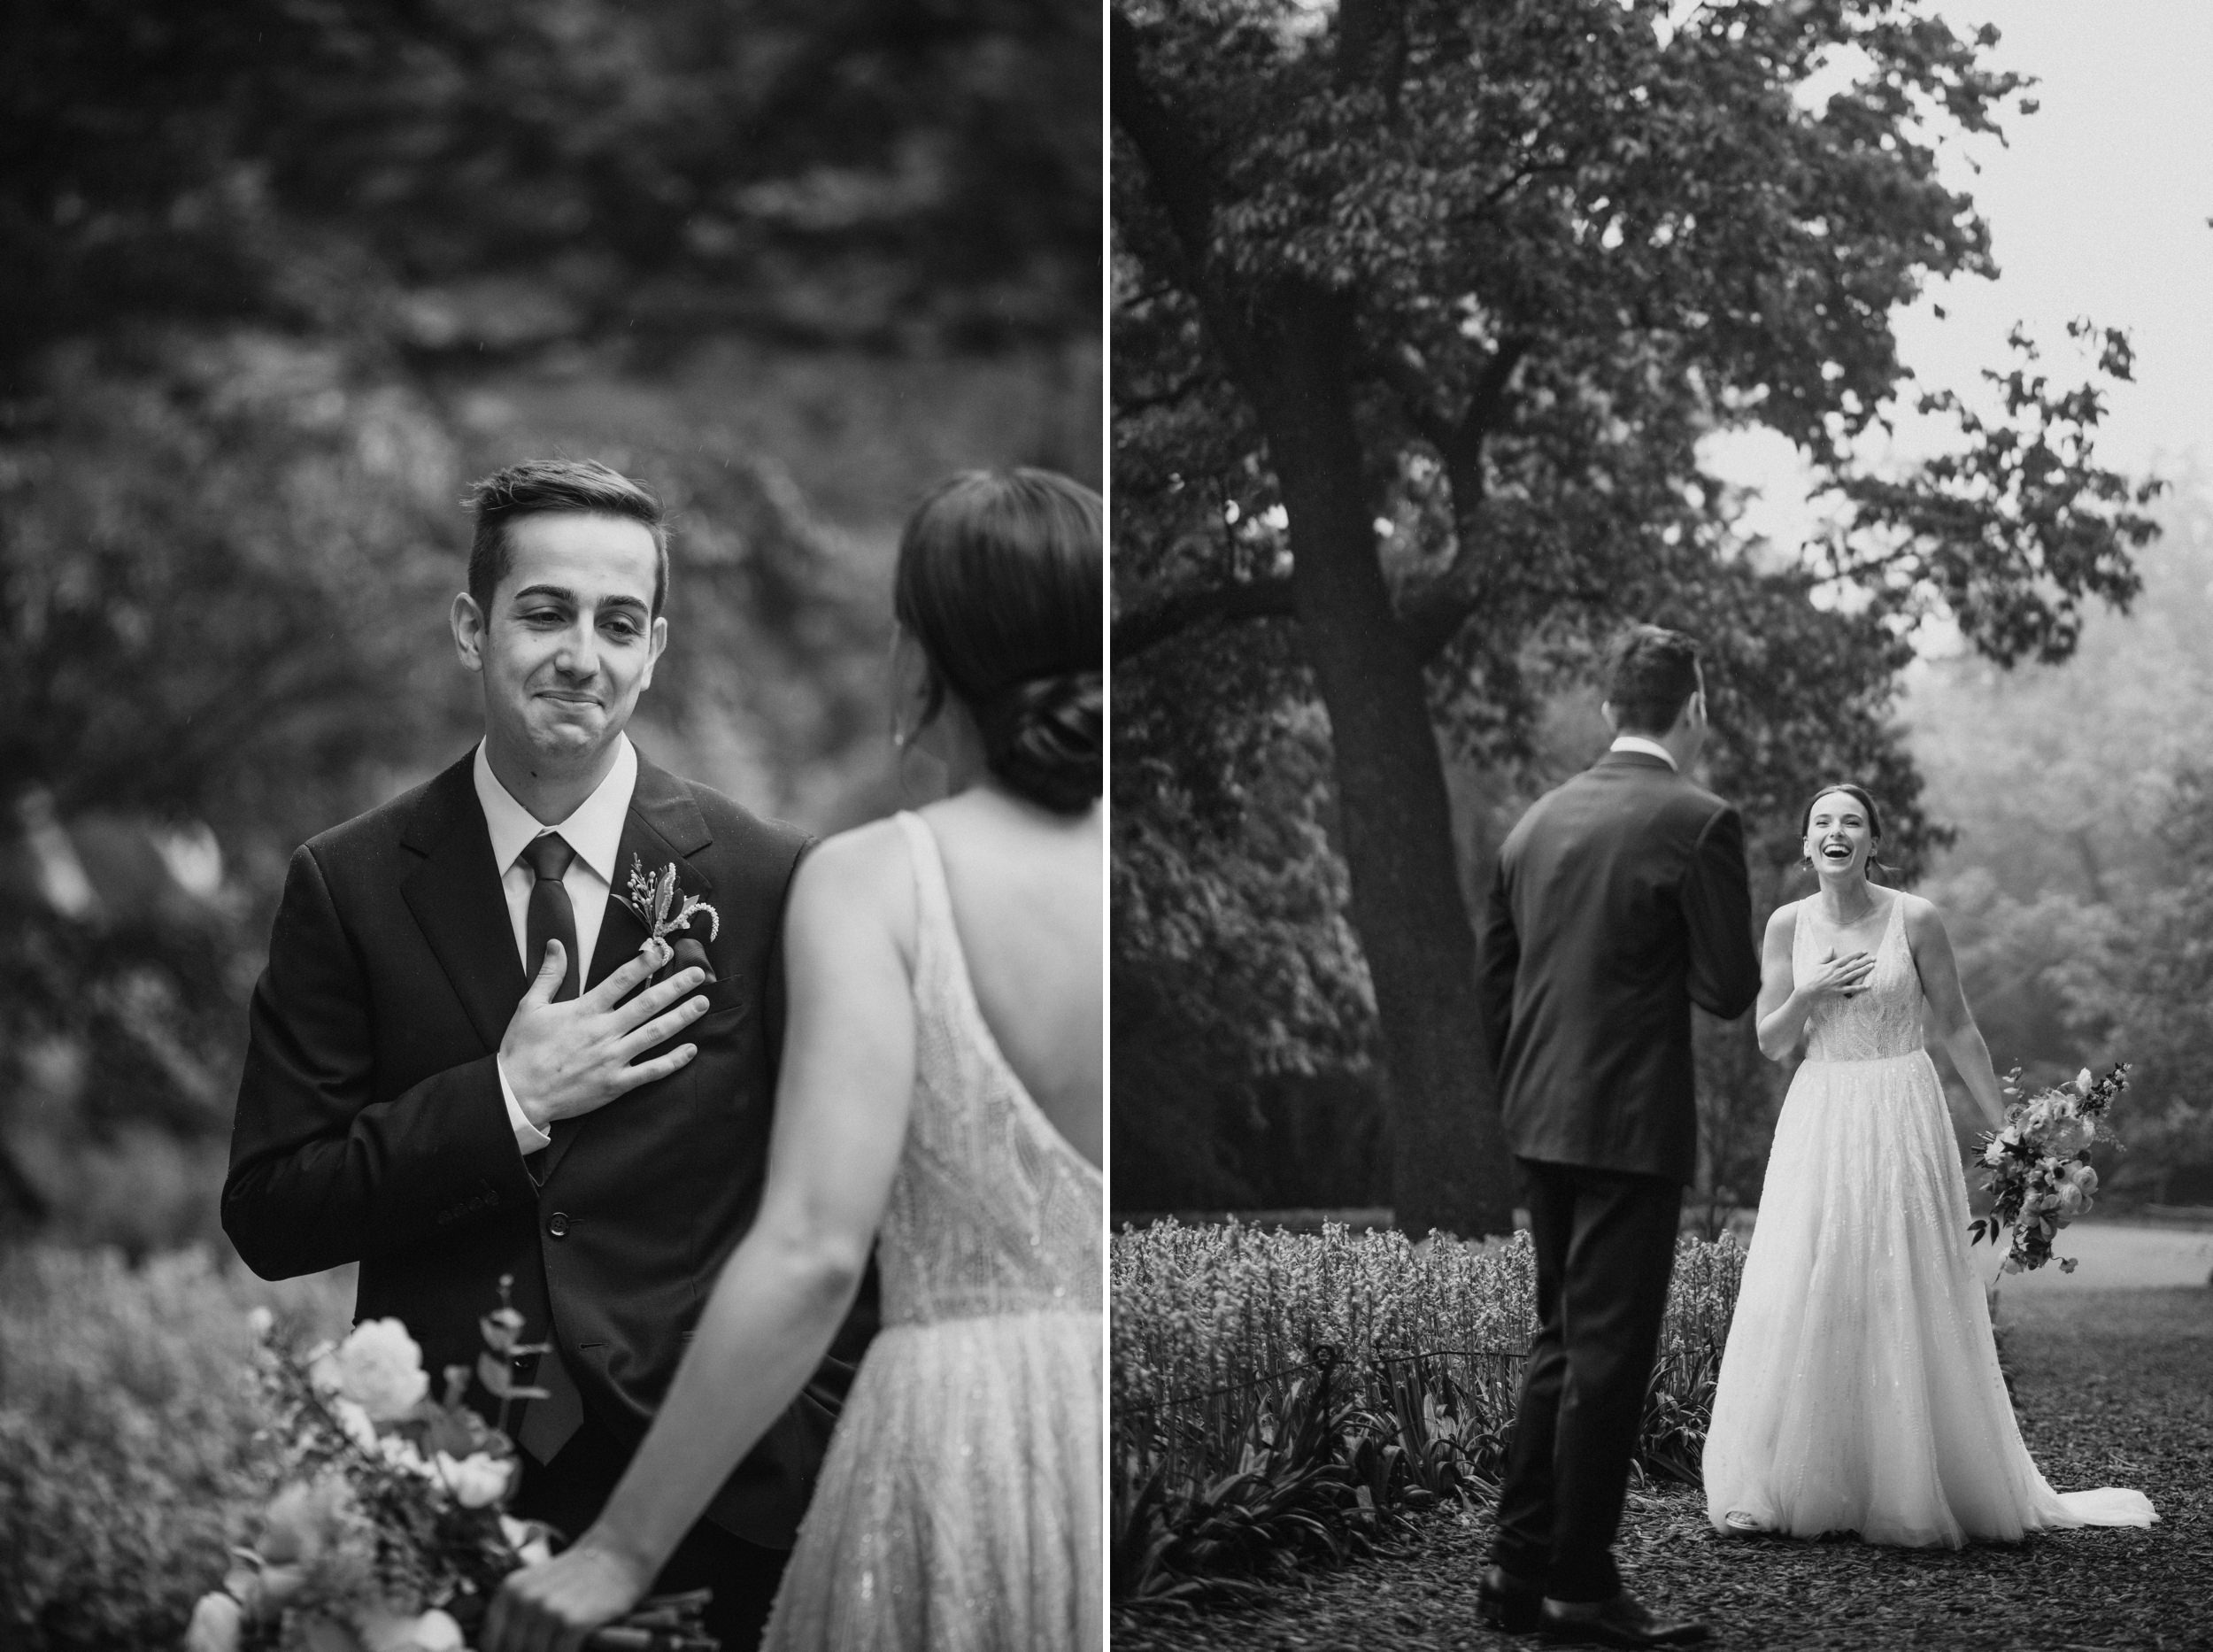 Emotional first look of a  wedding couple at the Brooklyn botanic Garden